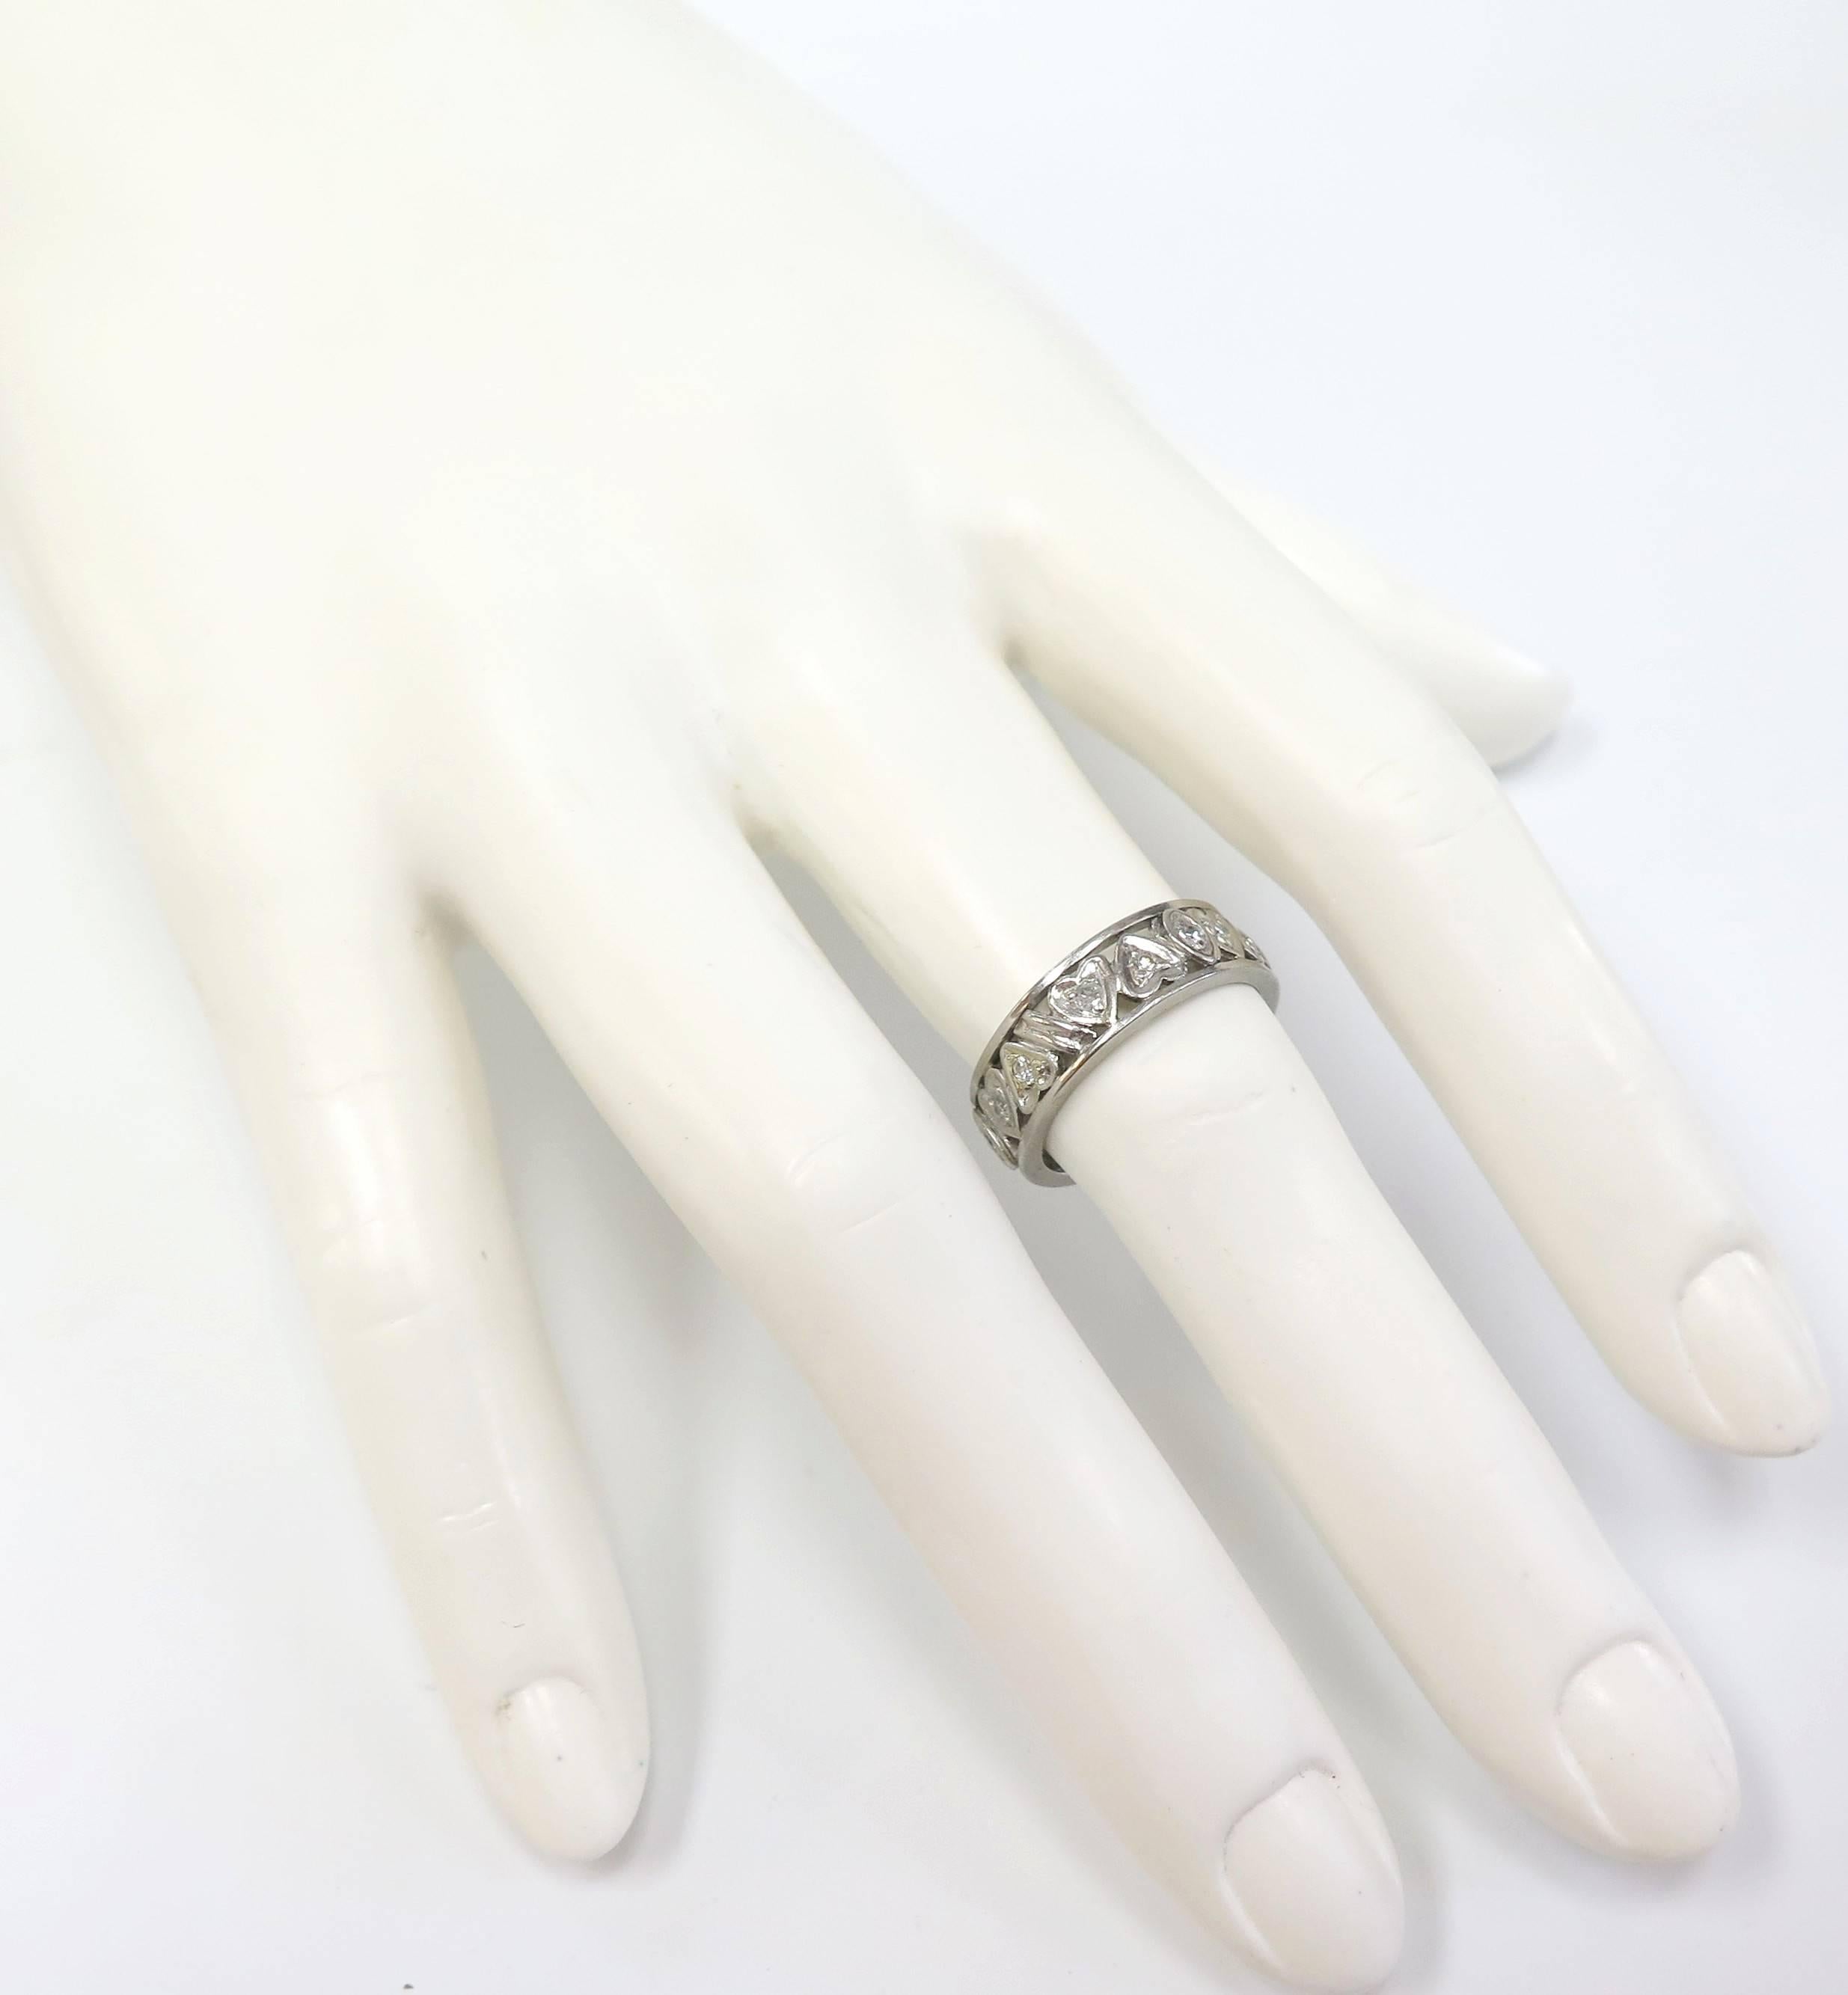 This romantic Art Deco Eternity Band features diamonds in heart-shaped frames. Radiant with 1/2 ct. t.w. of glittery single cut diamonds set in Platinum, this wedding band brings your forever promise to life.

size 6 1/2